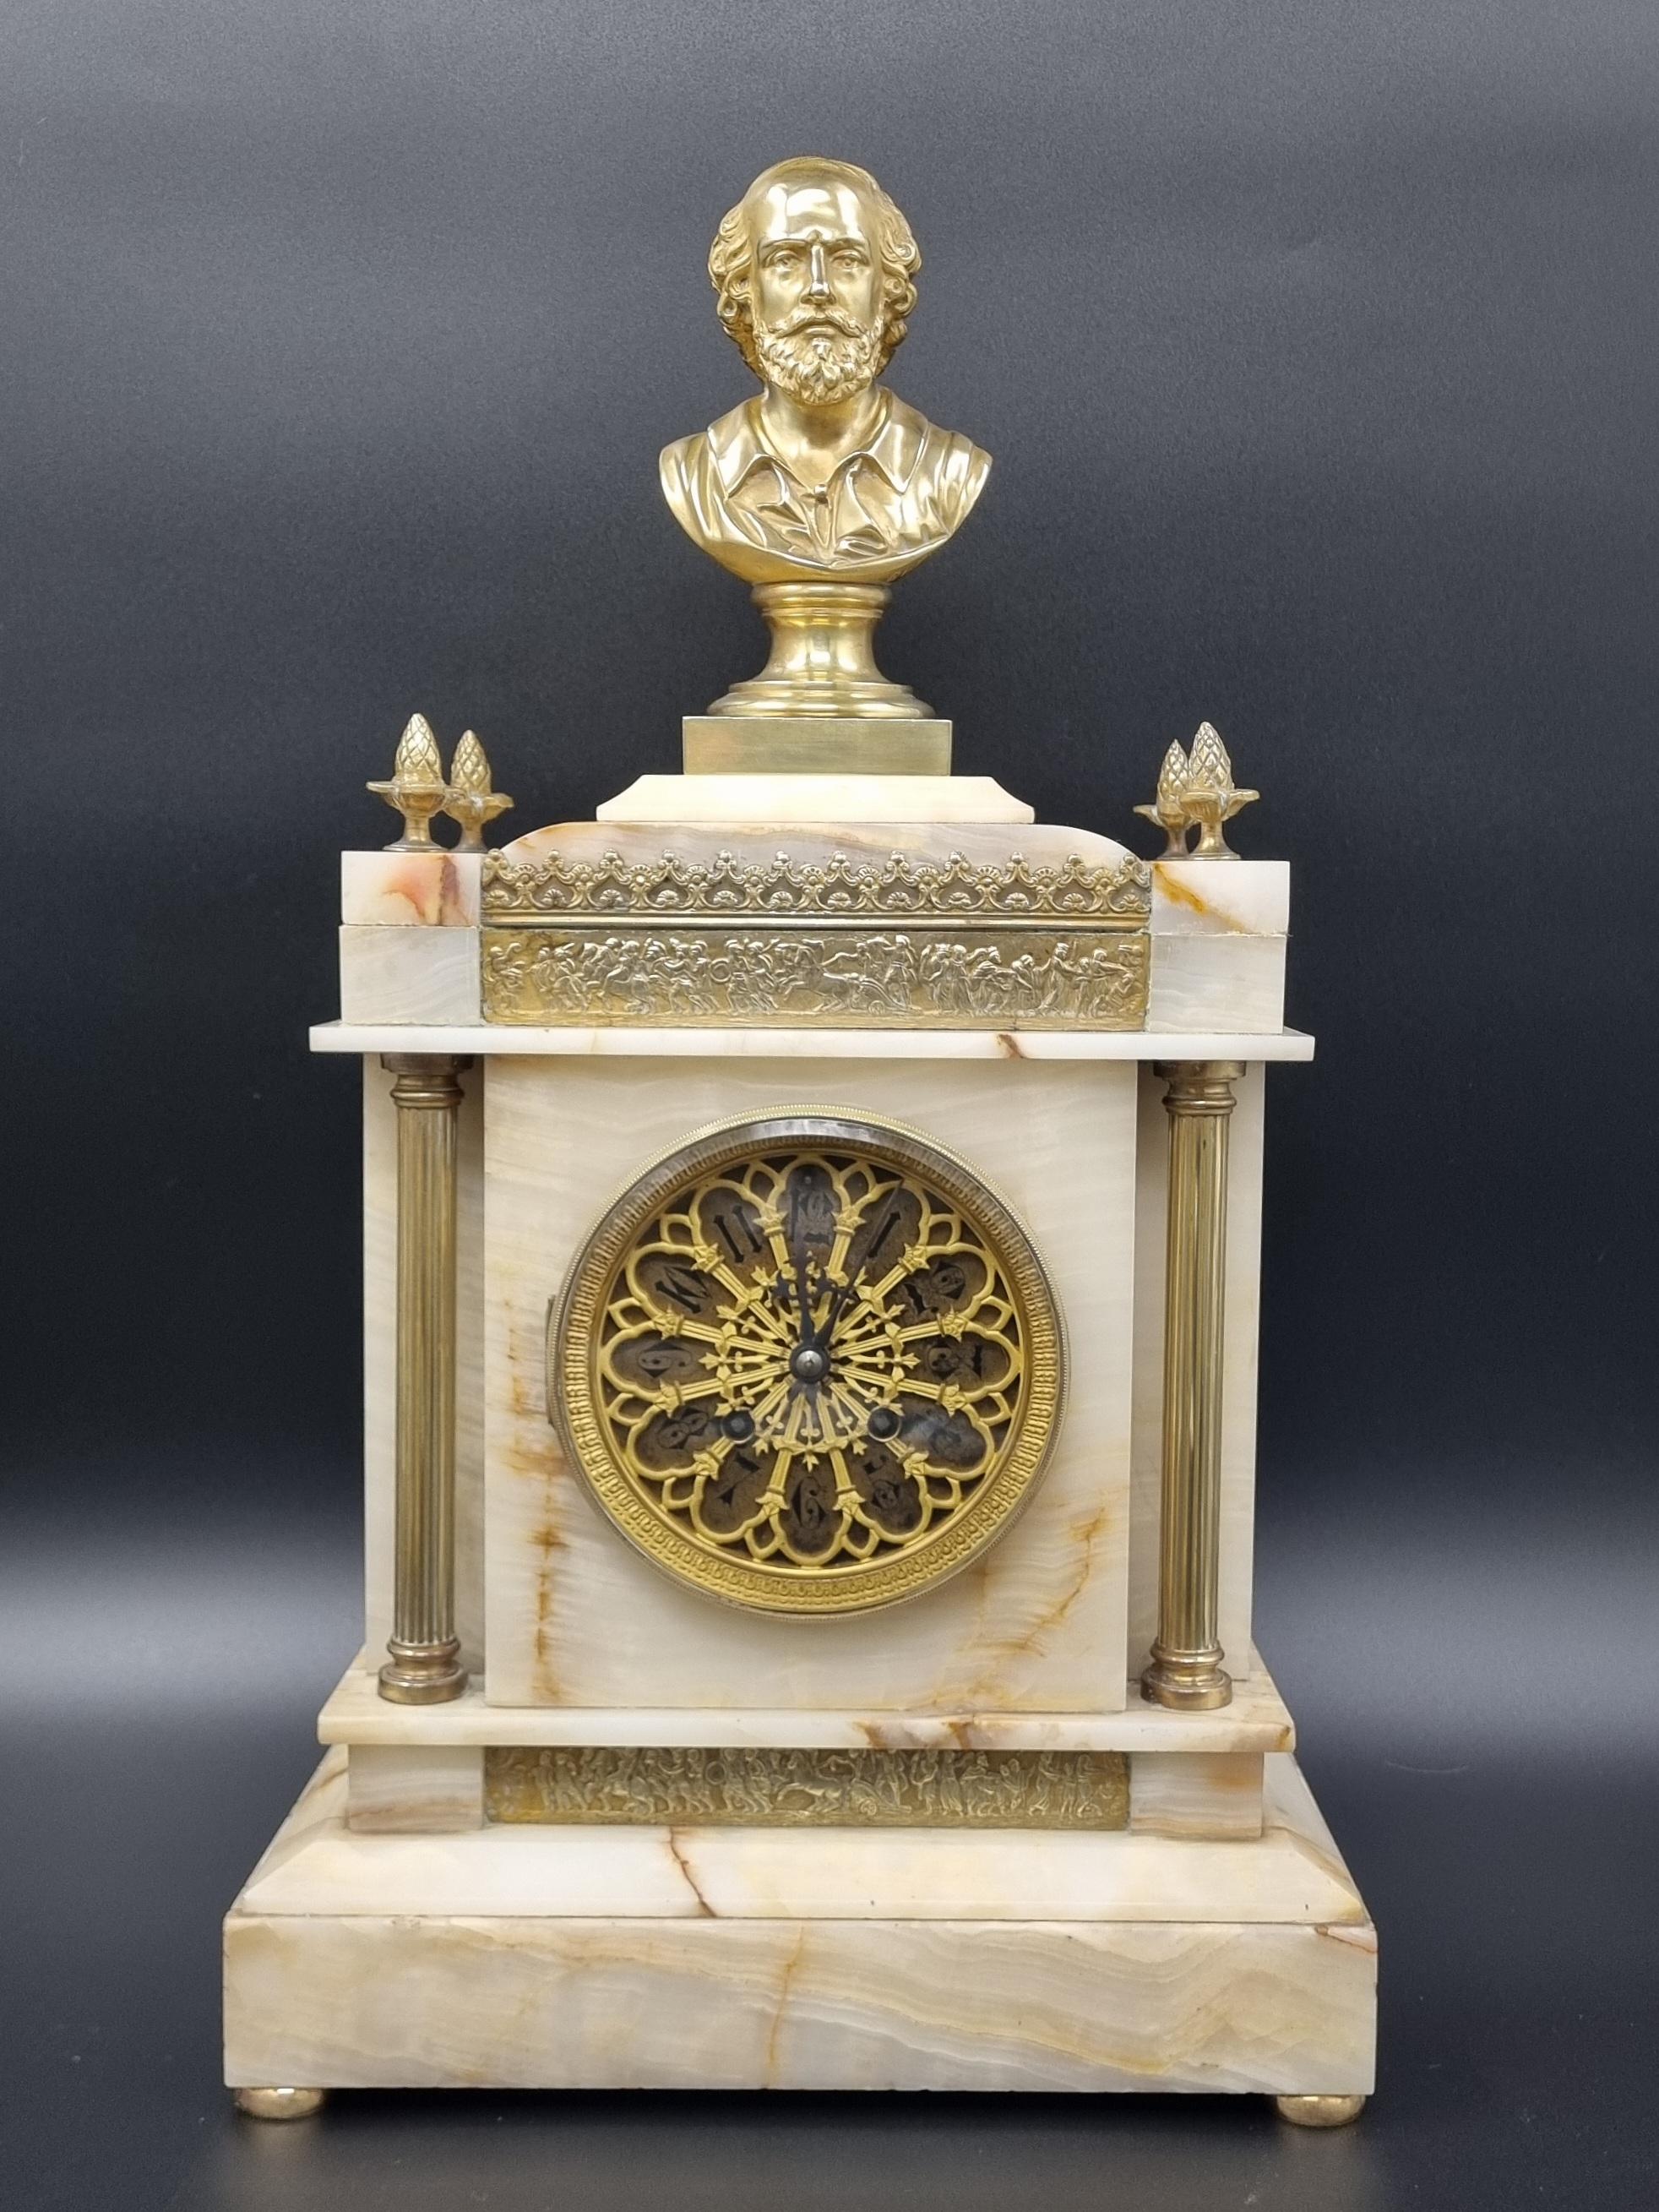 A William Shakespeare Gothic revival mantle clock, dating back to the mid-19th century, superb quality and is made from onyx and gilt bronze. The clock showcases reeded column supports and classical friezes adorned with exquisitely detailed scenes